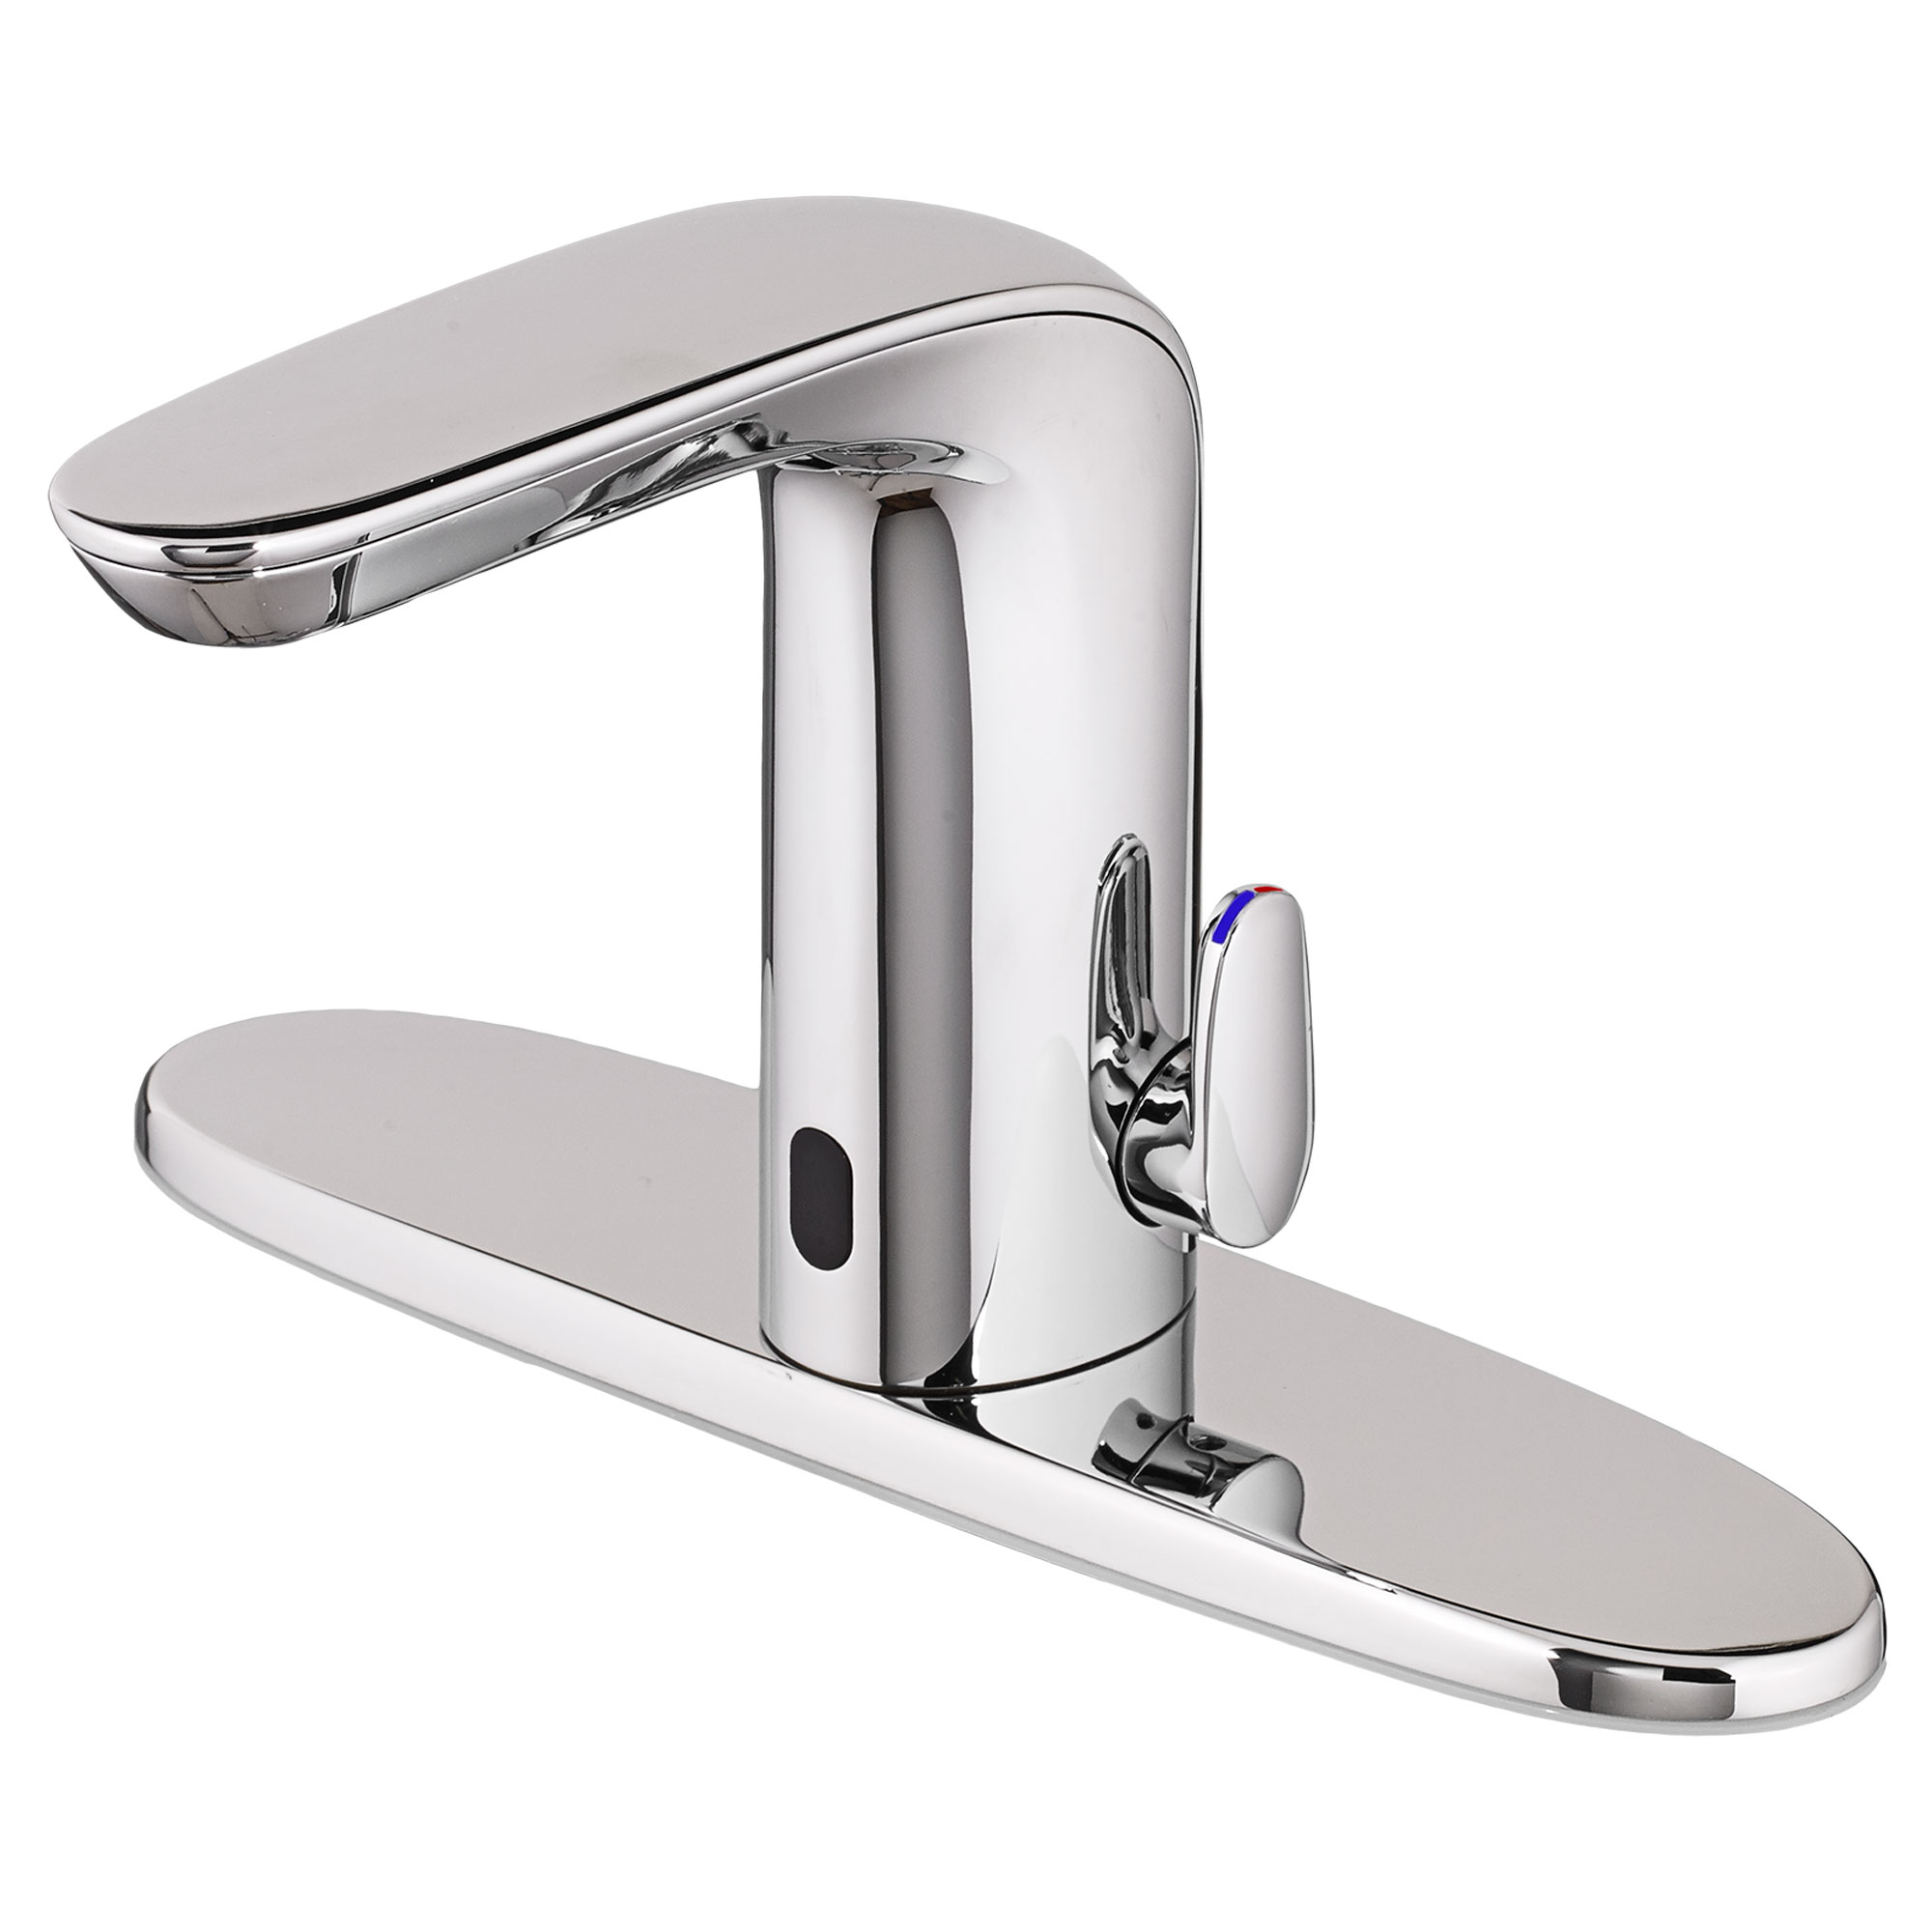 NextGen™ Selectronic® Touchless Faucet, Battery-Powered With SmarTherm Safety Shut-Off + ADM, 1.5 gpm/5.7 Lpm